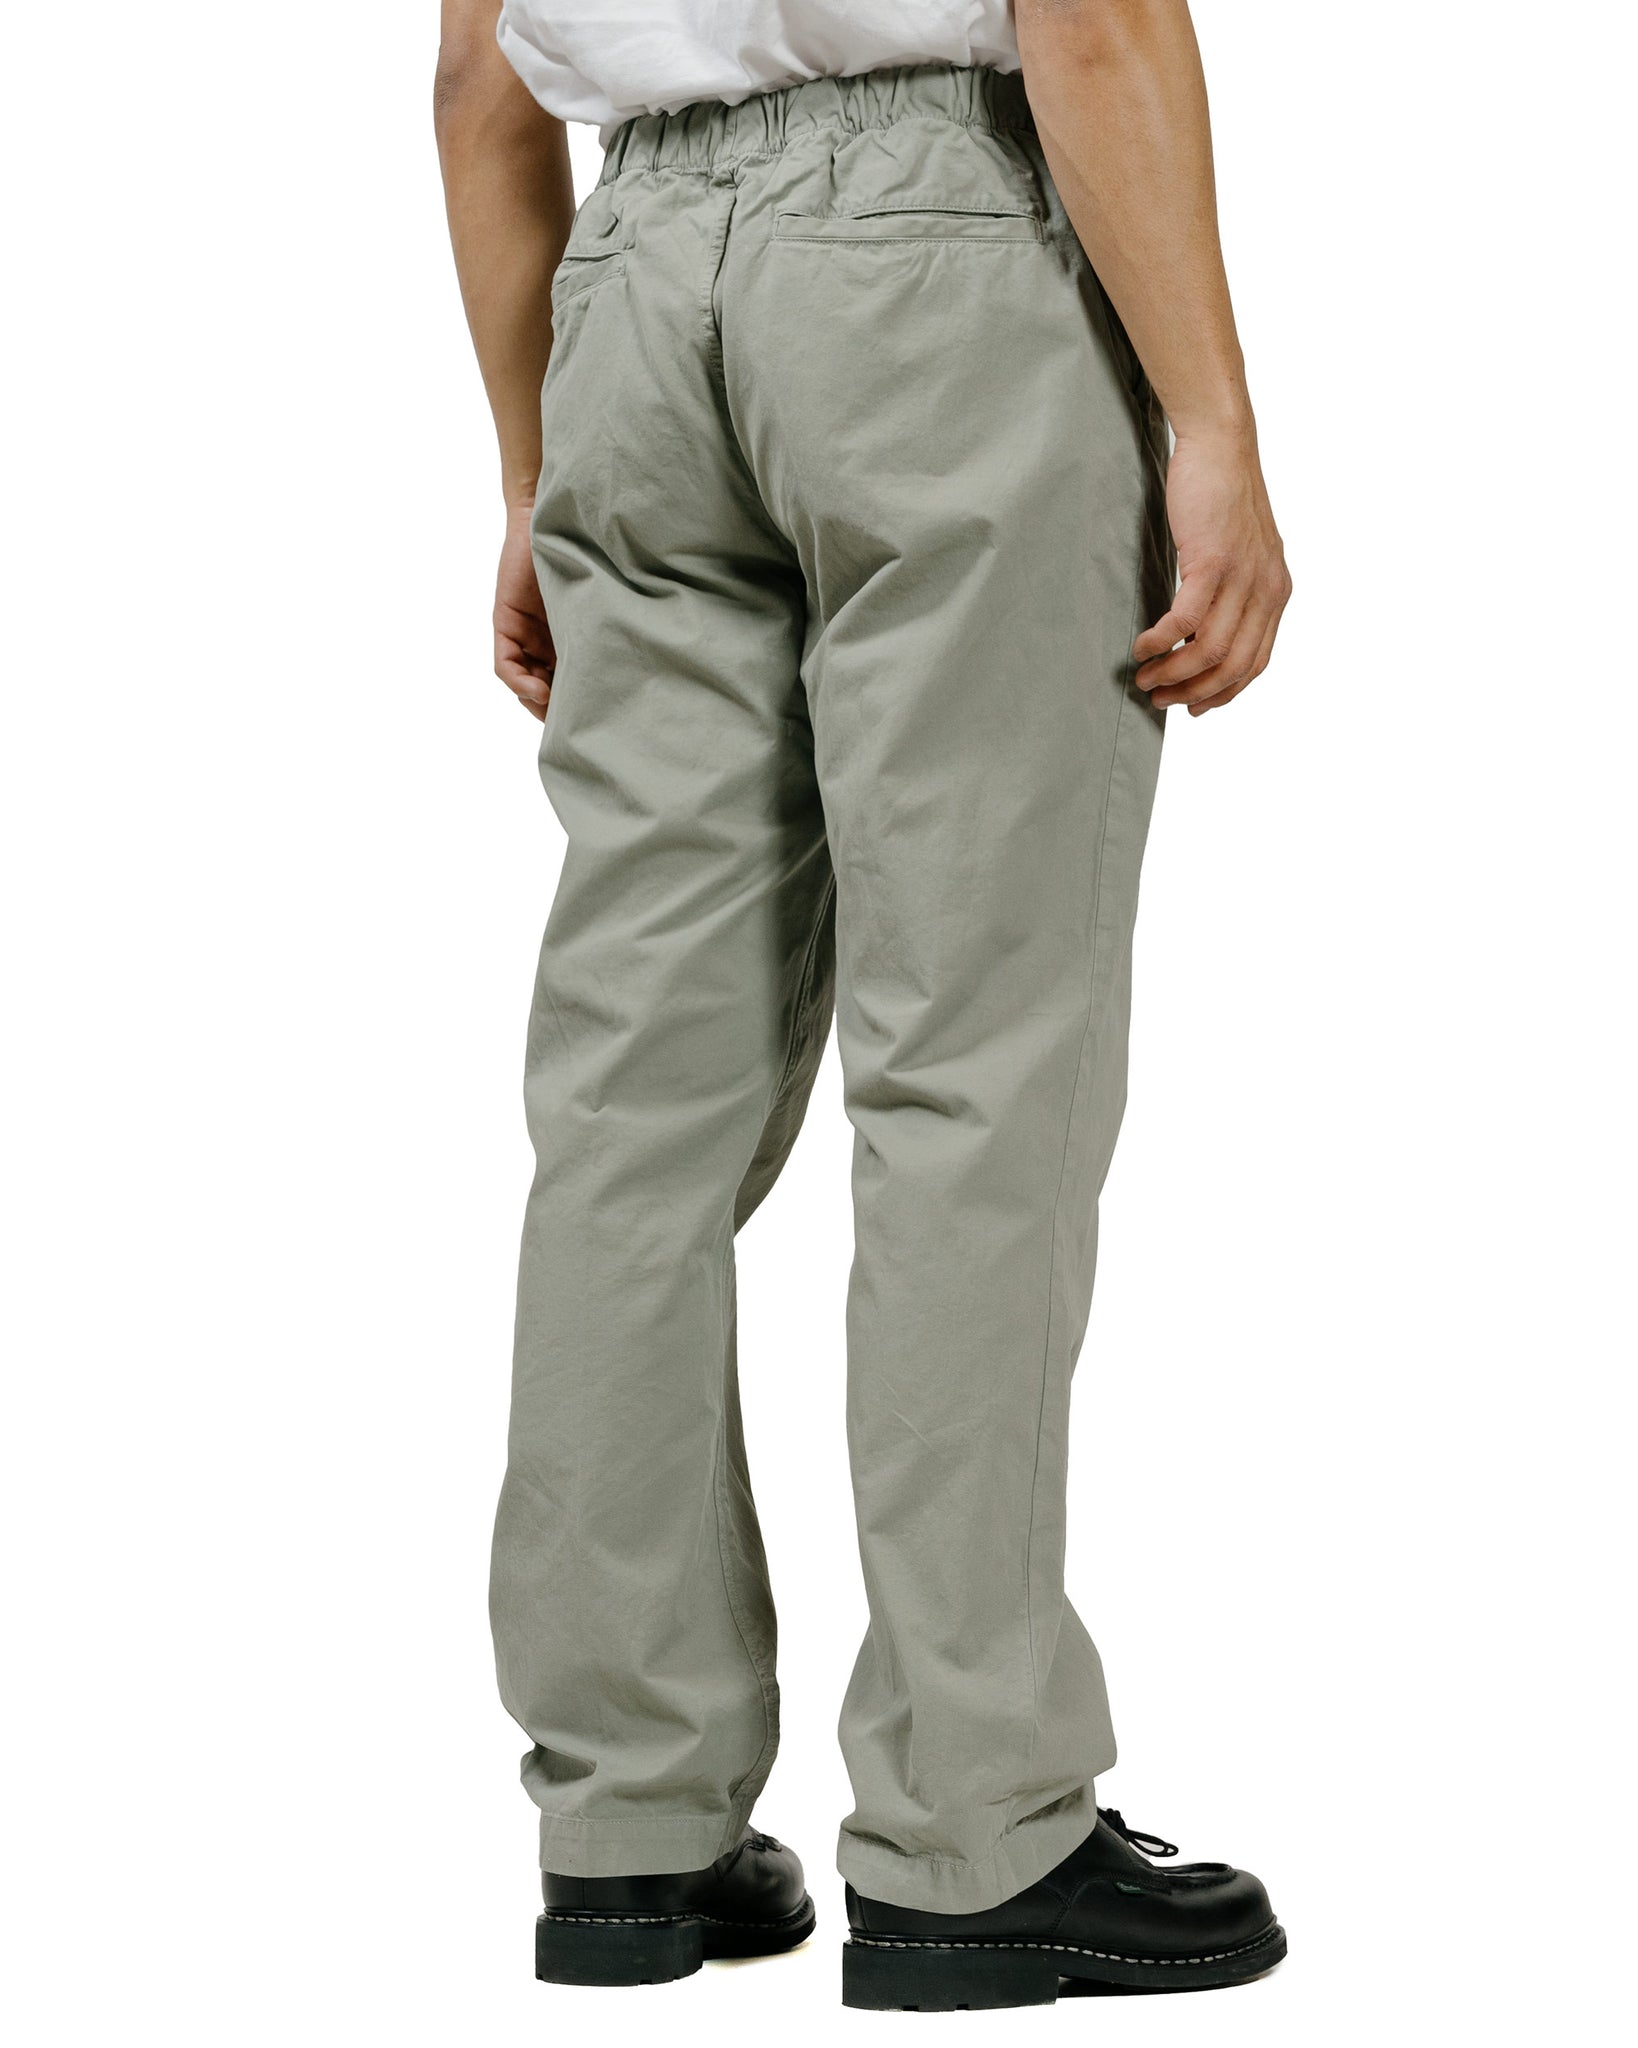 Save Khaki United Twill Easy Chino Sprout model back